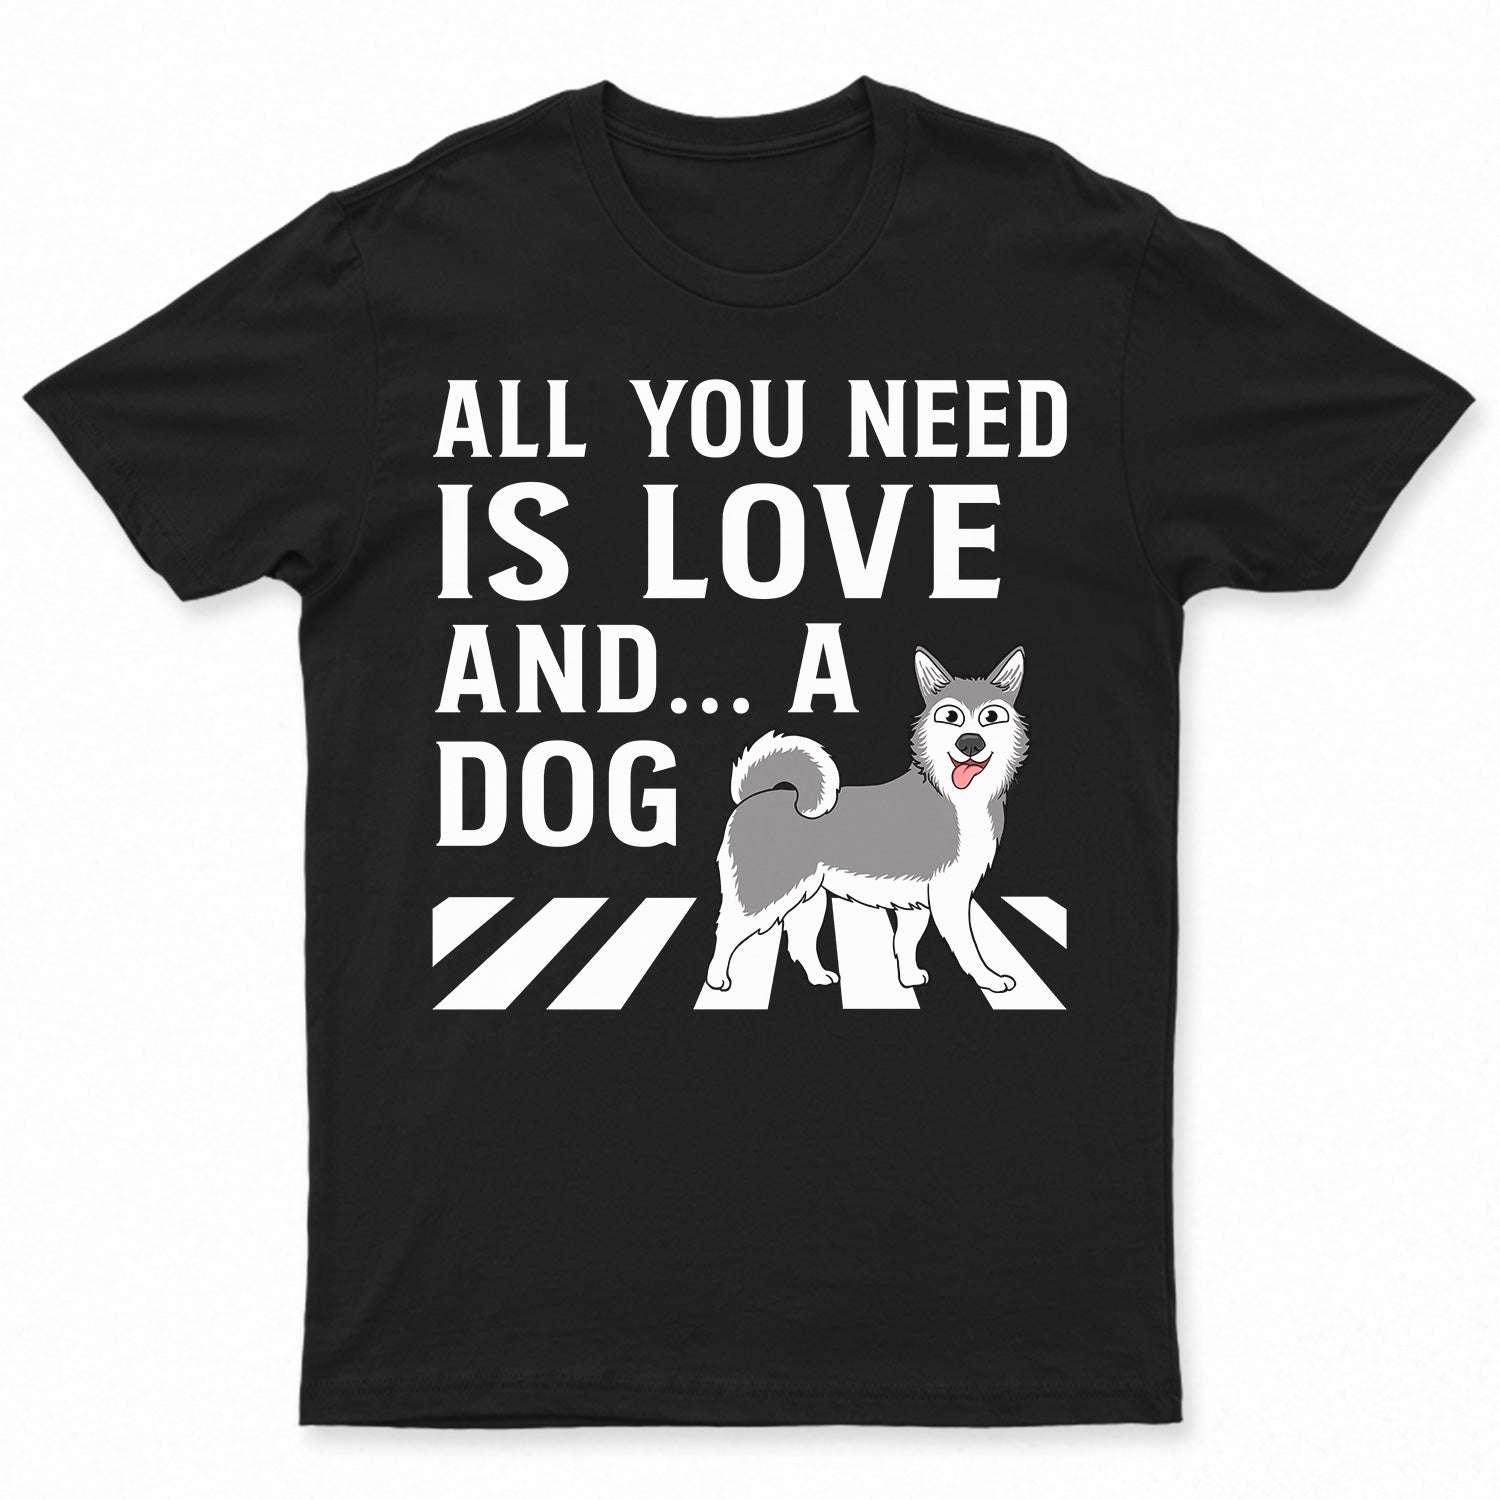 All You Need Is Love And A Dog - Gift For Dog Lovers - Personalized T Shirt